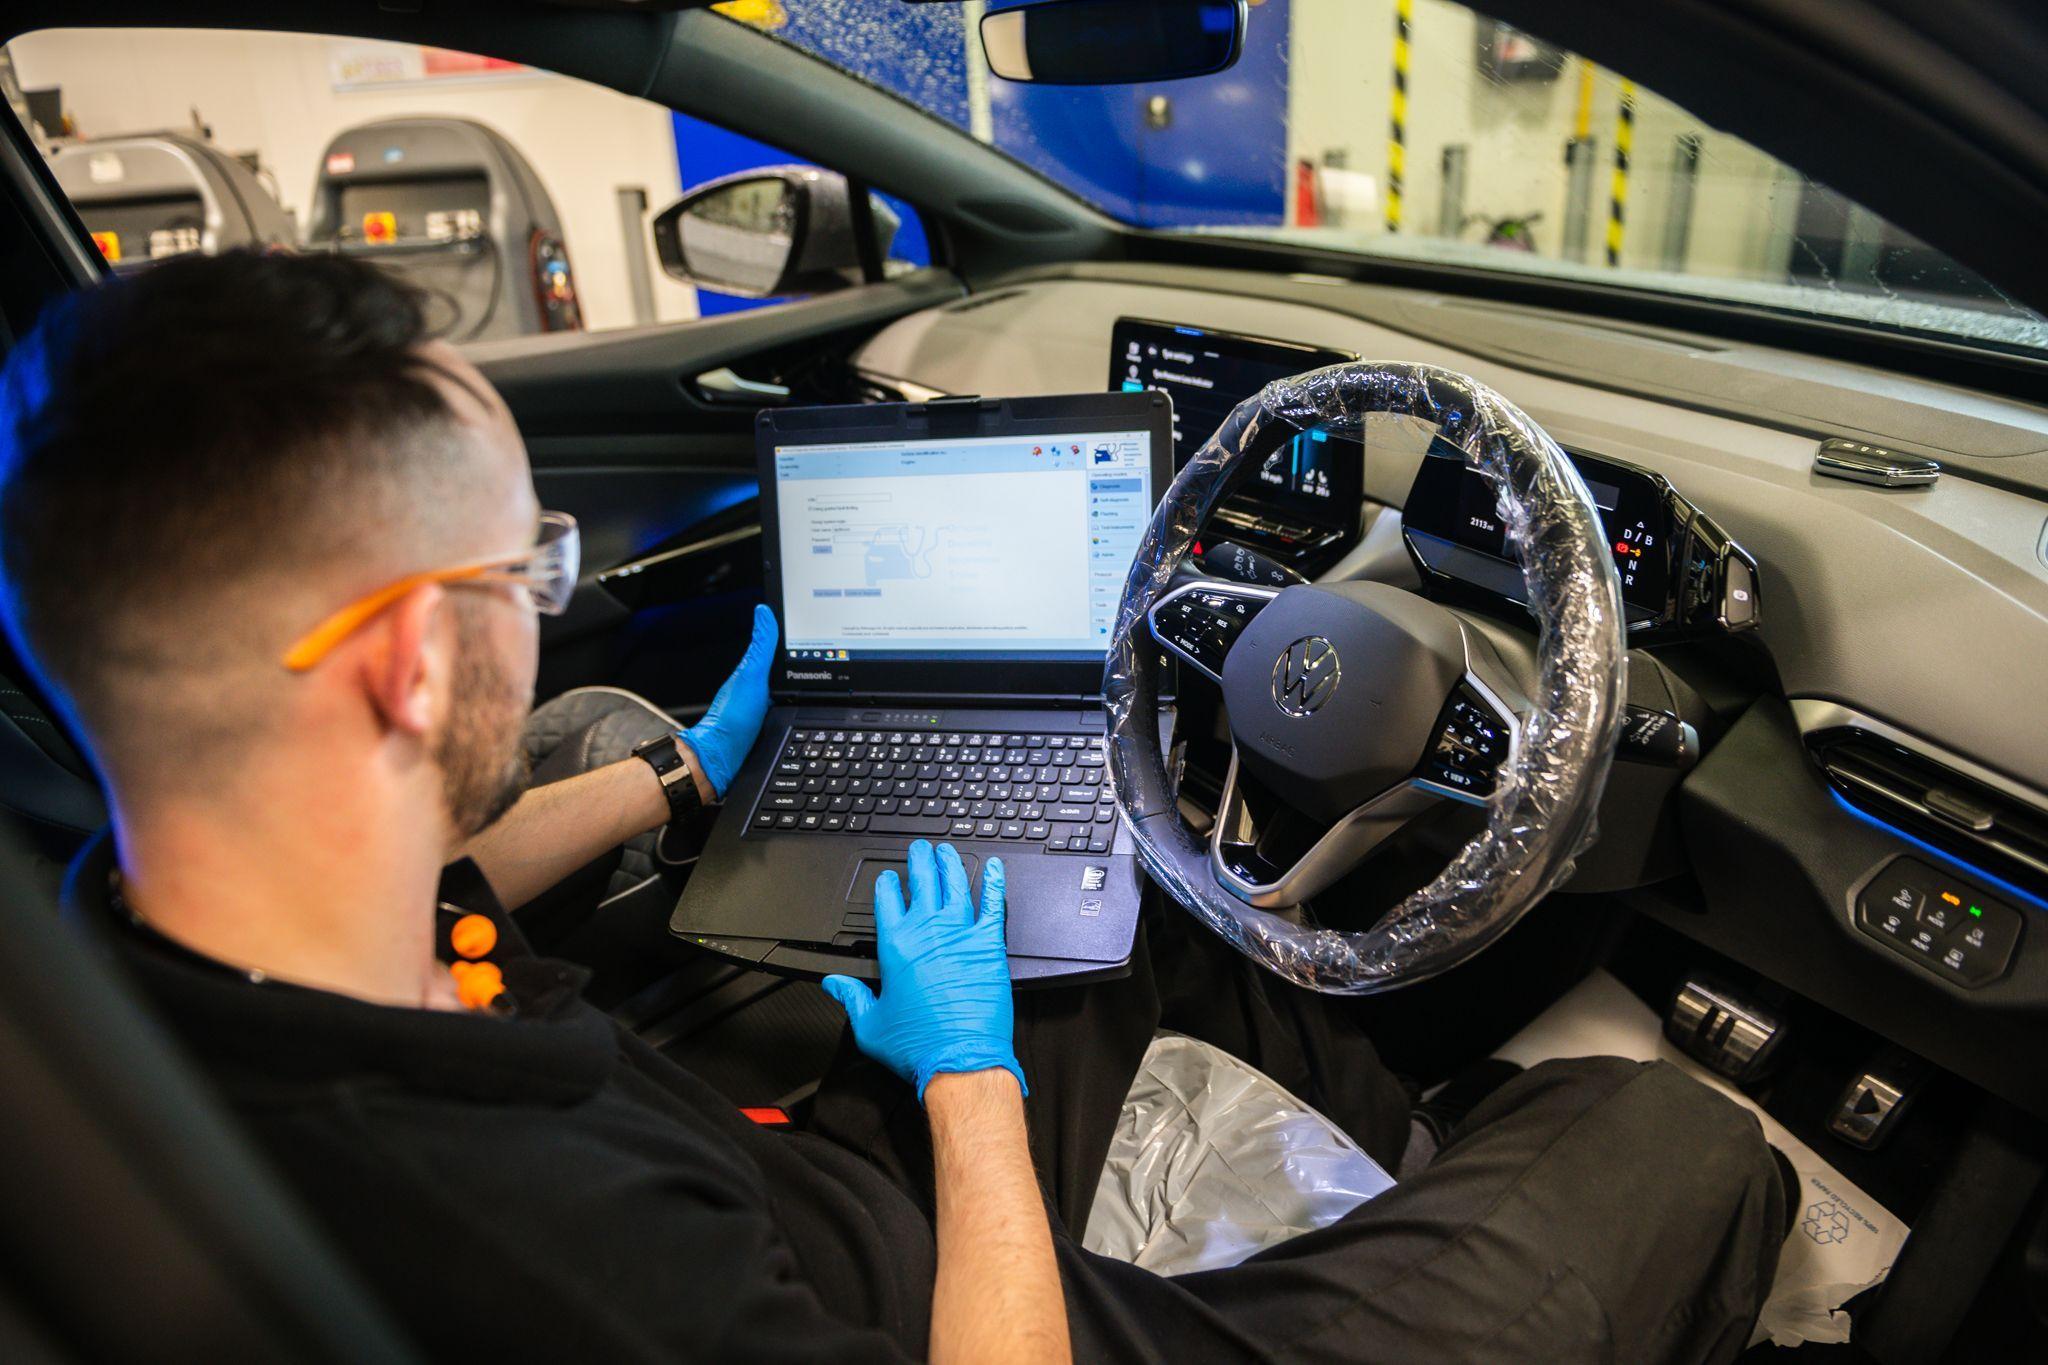 Volkswagen Technician inspects laptop during initial diagnostic scan